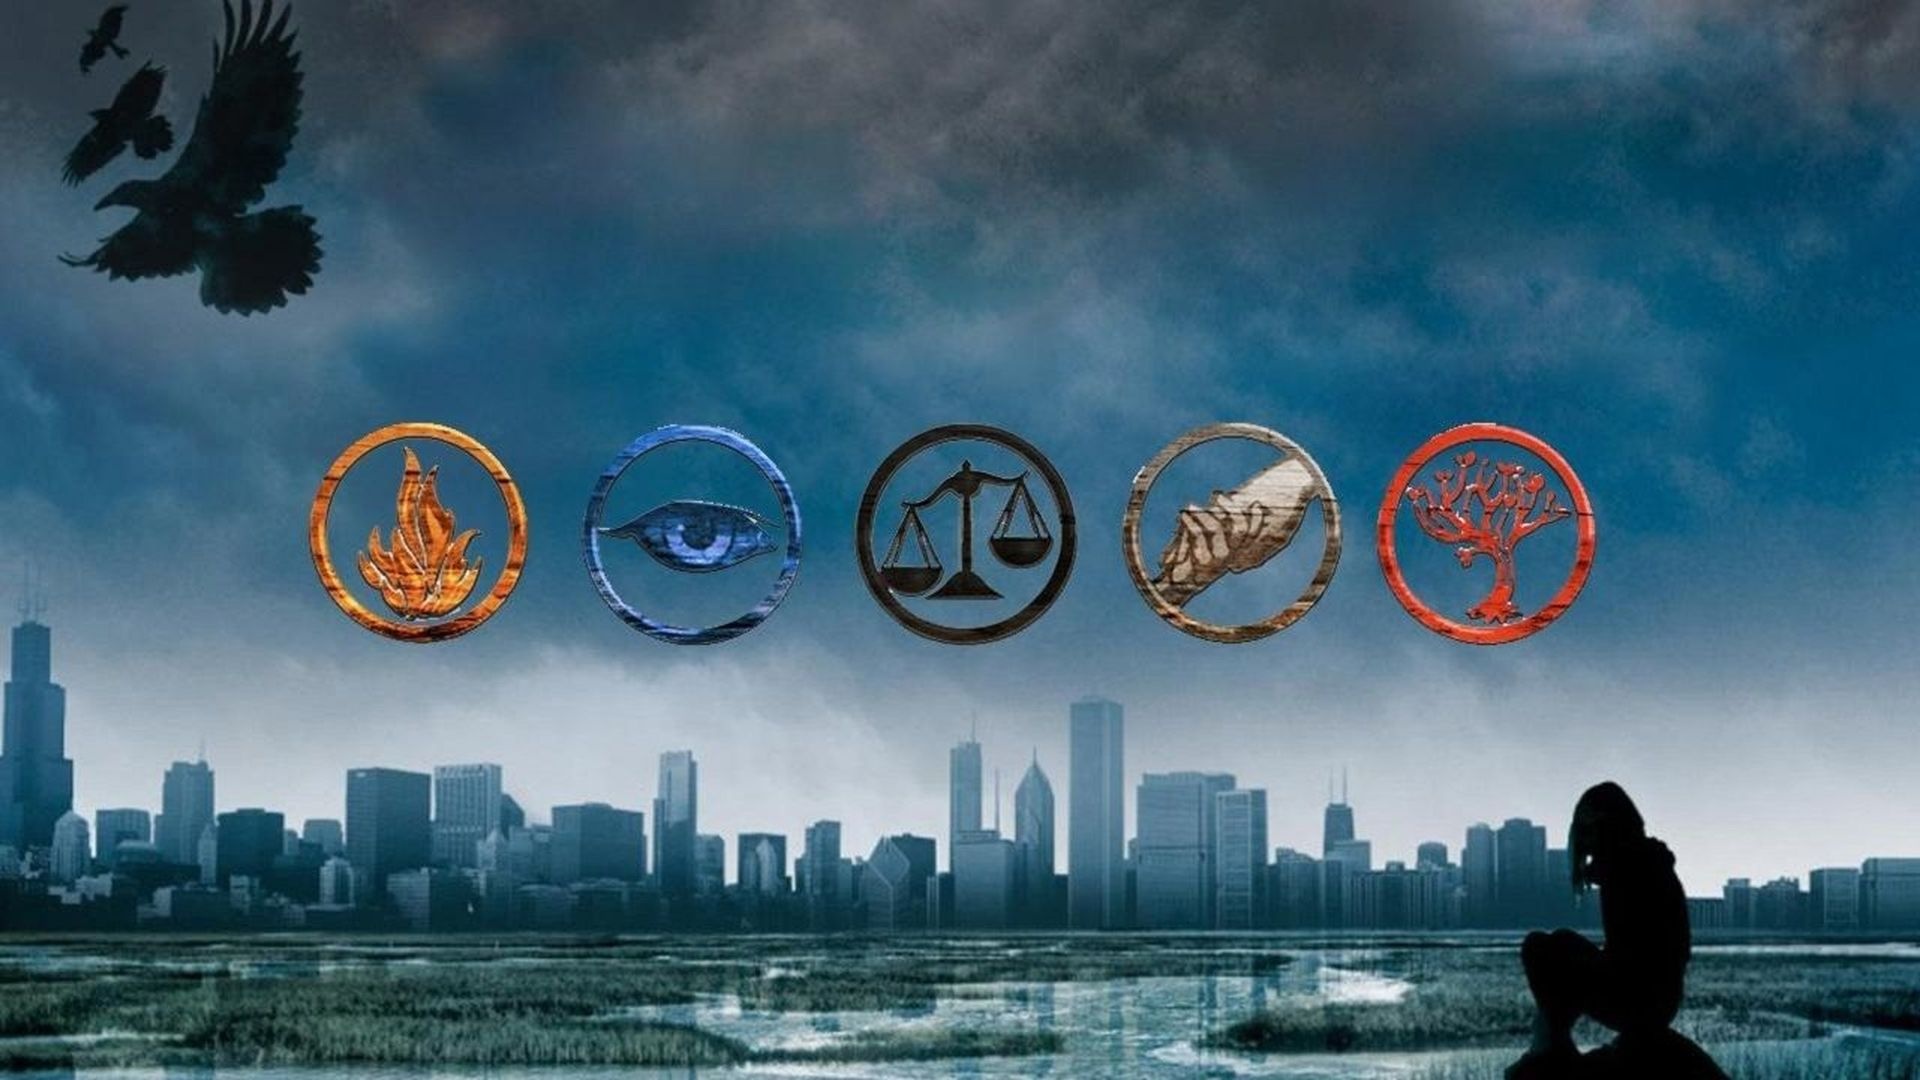 Divergent factions, Personality quiz, Which faction are you?, Faction identification, 1920x1080 Full HD Desktop